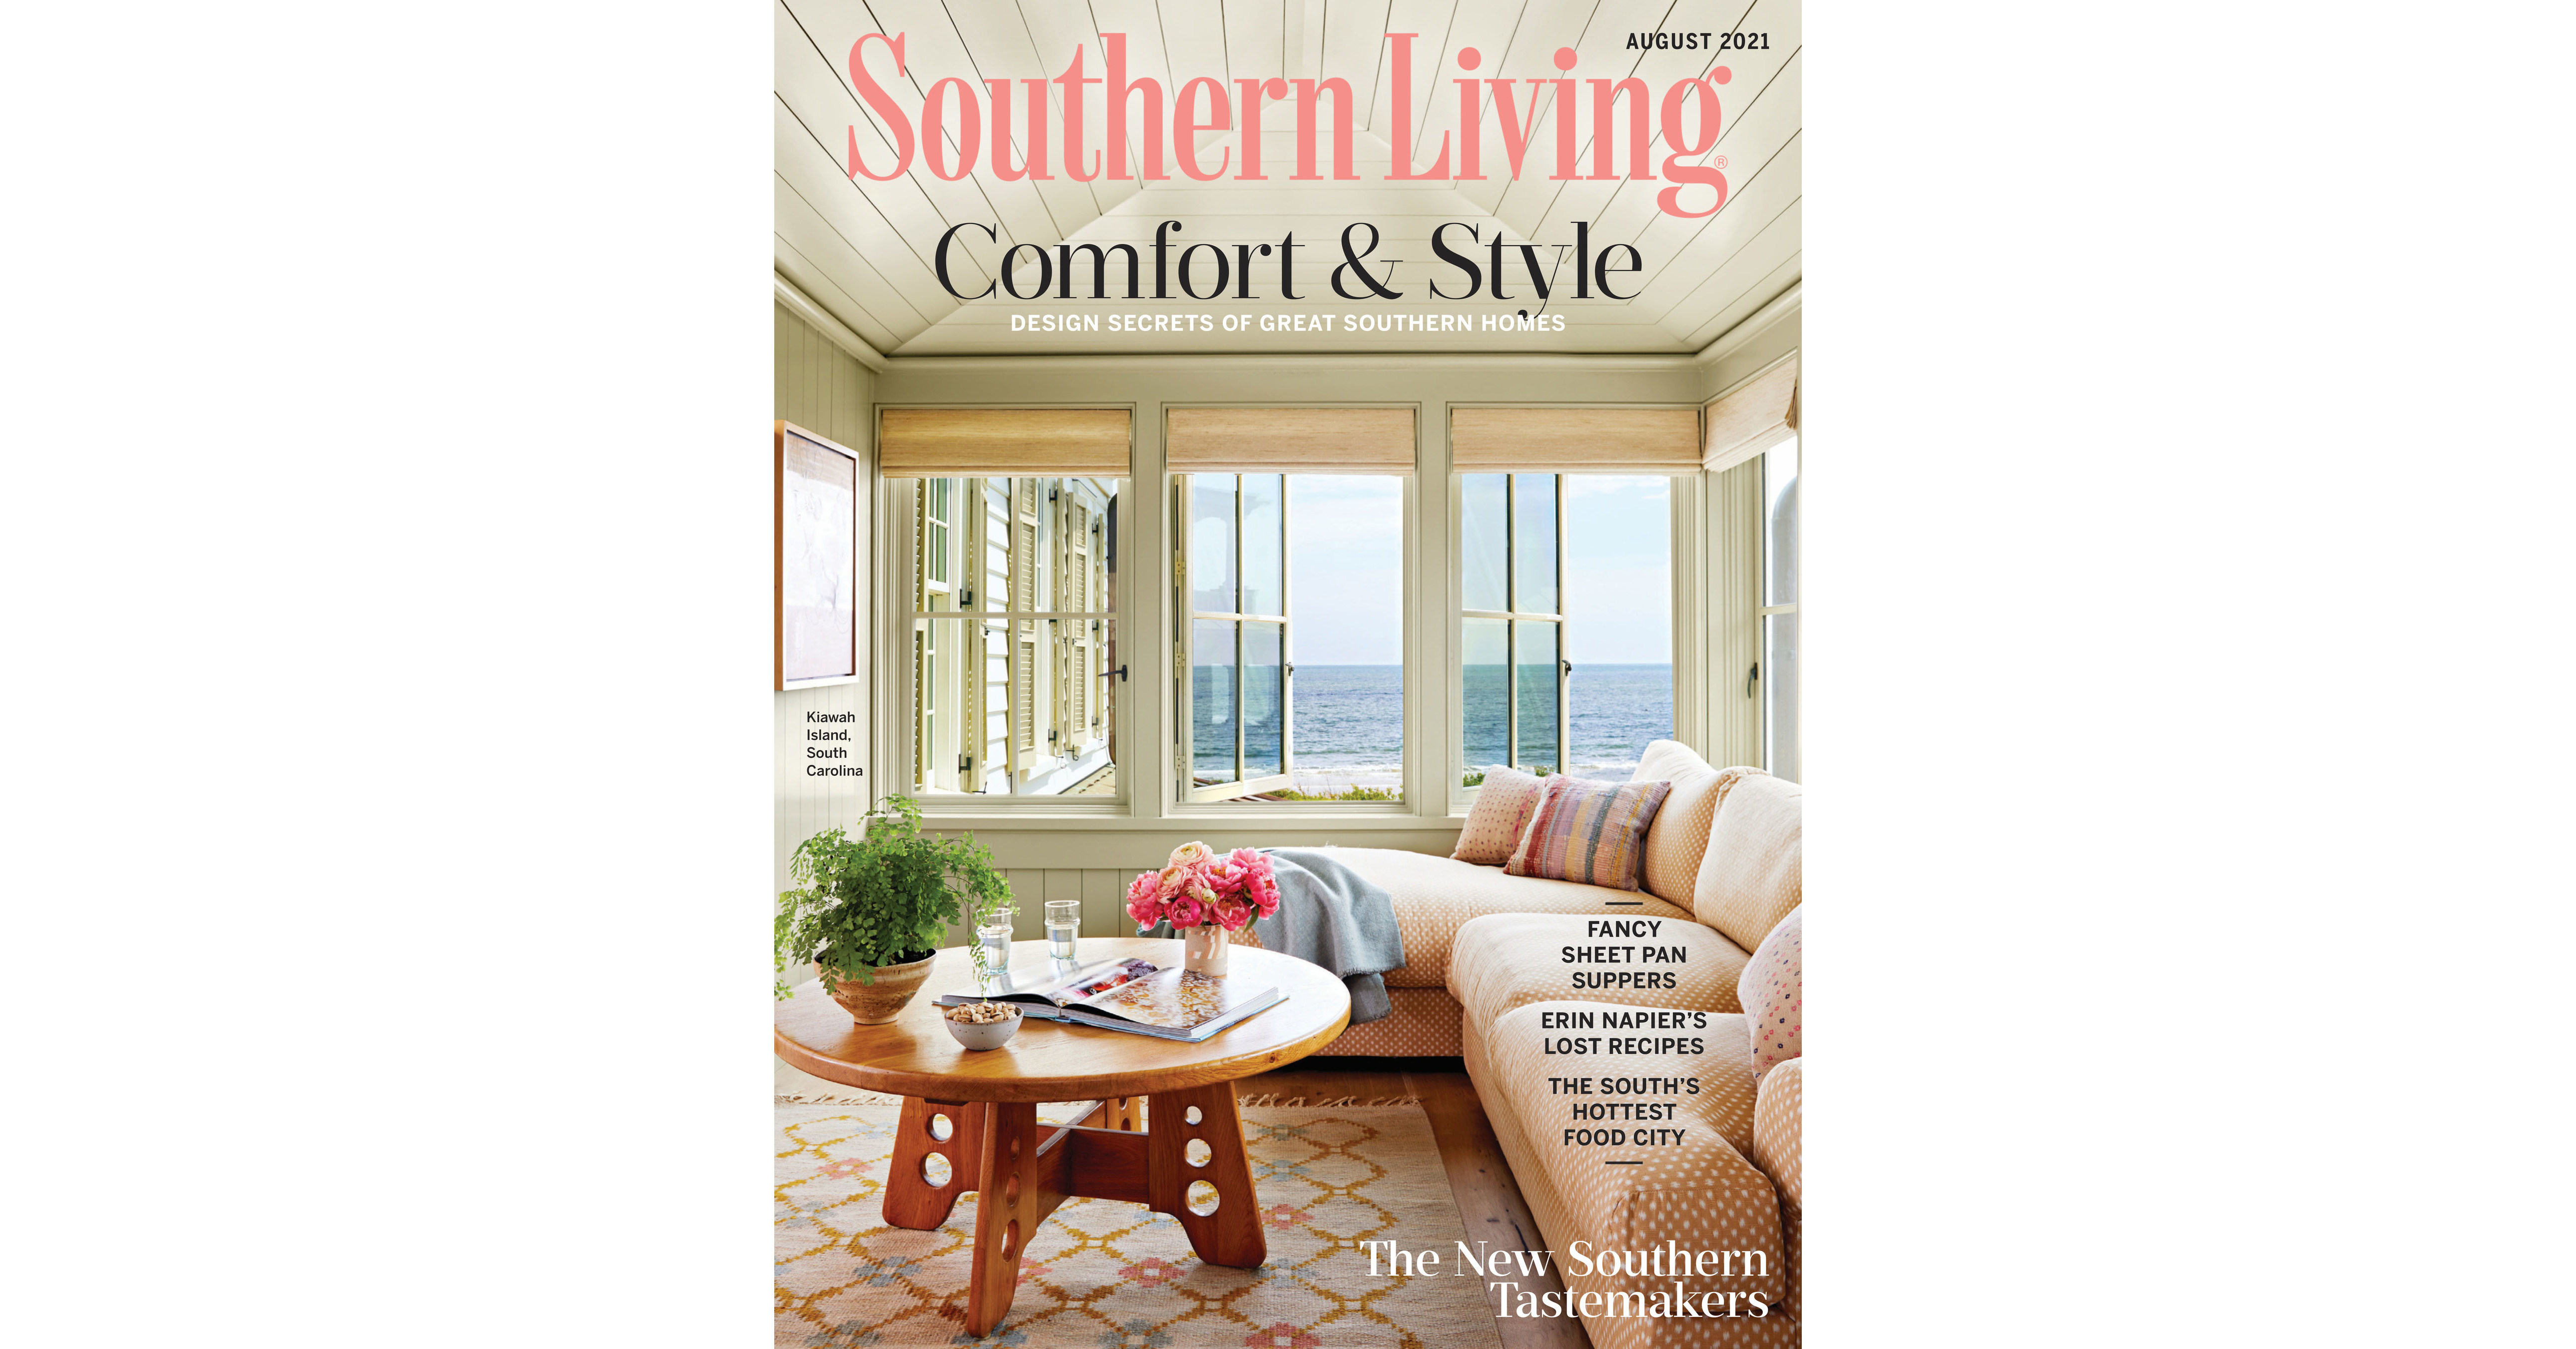 Southern Living Names 2021 Tastemakers